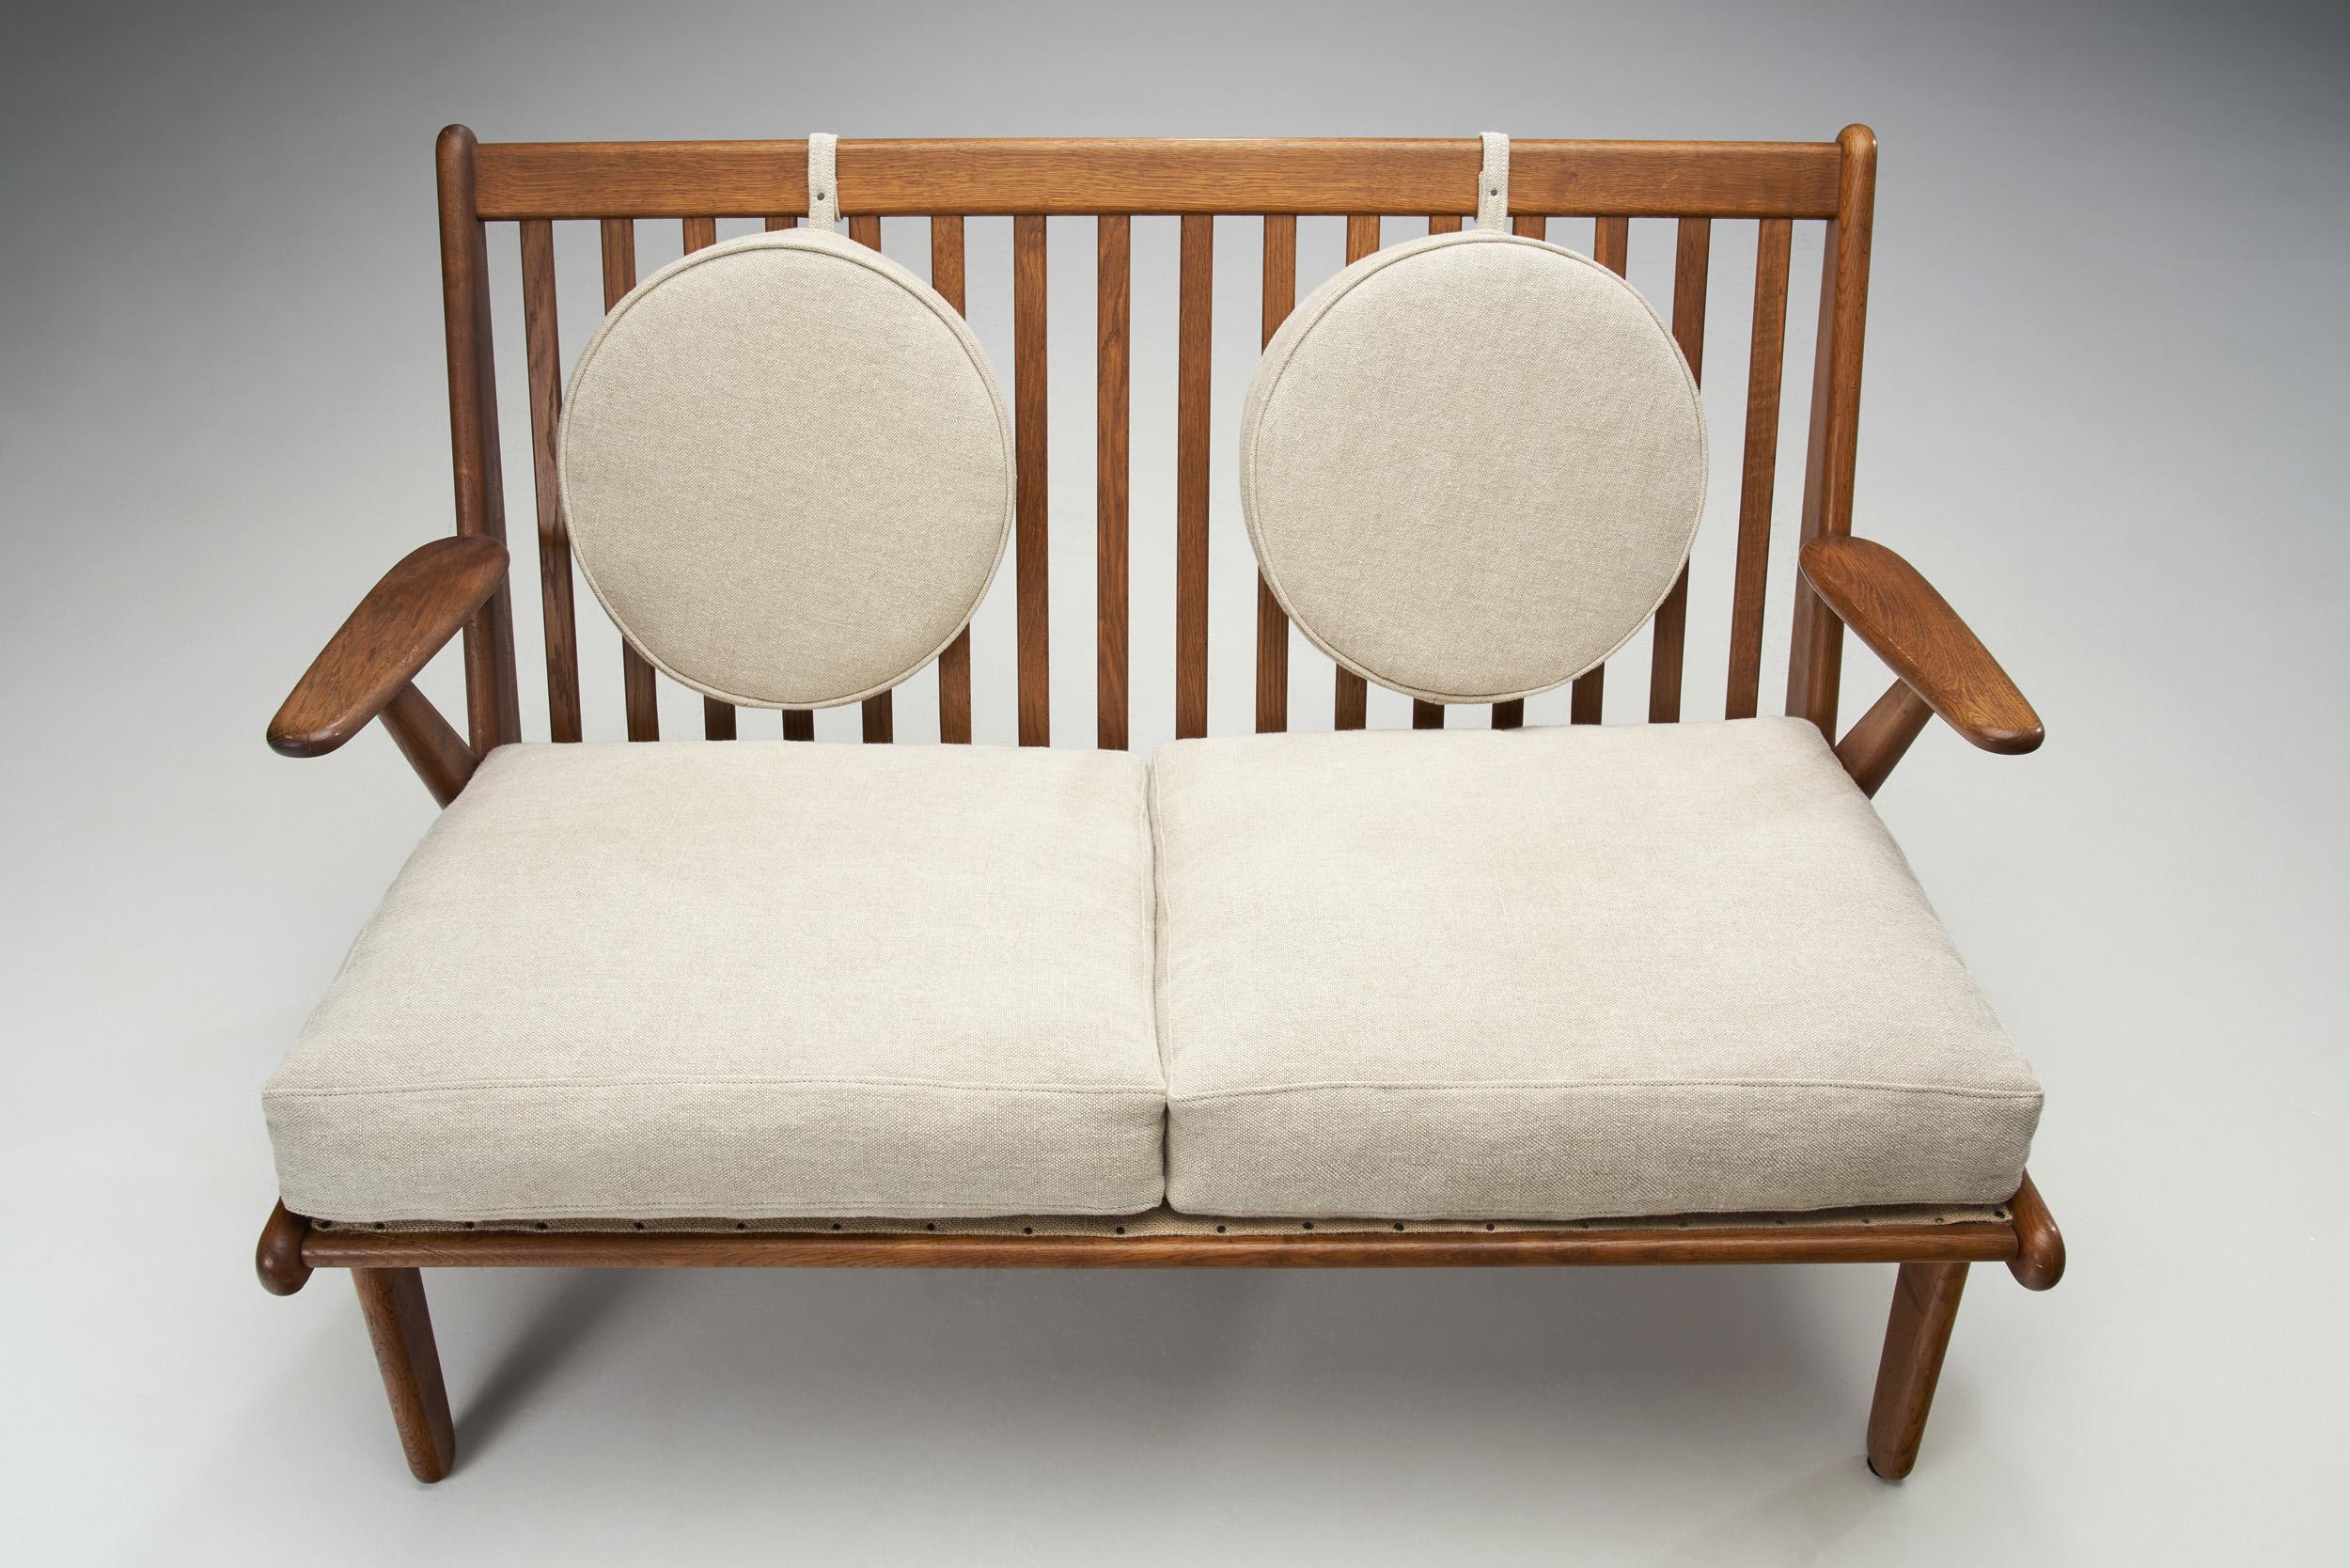 Danish Oak Two-Seater Bench with Pillows, Denmark ca. 1950s For Sale 1